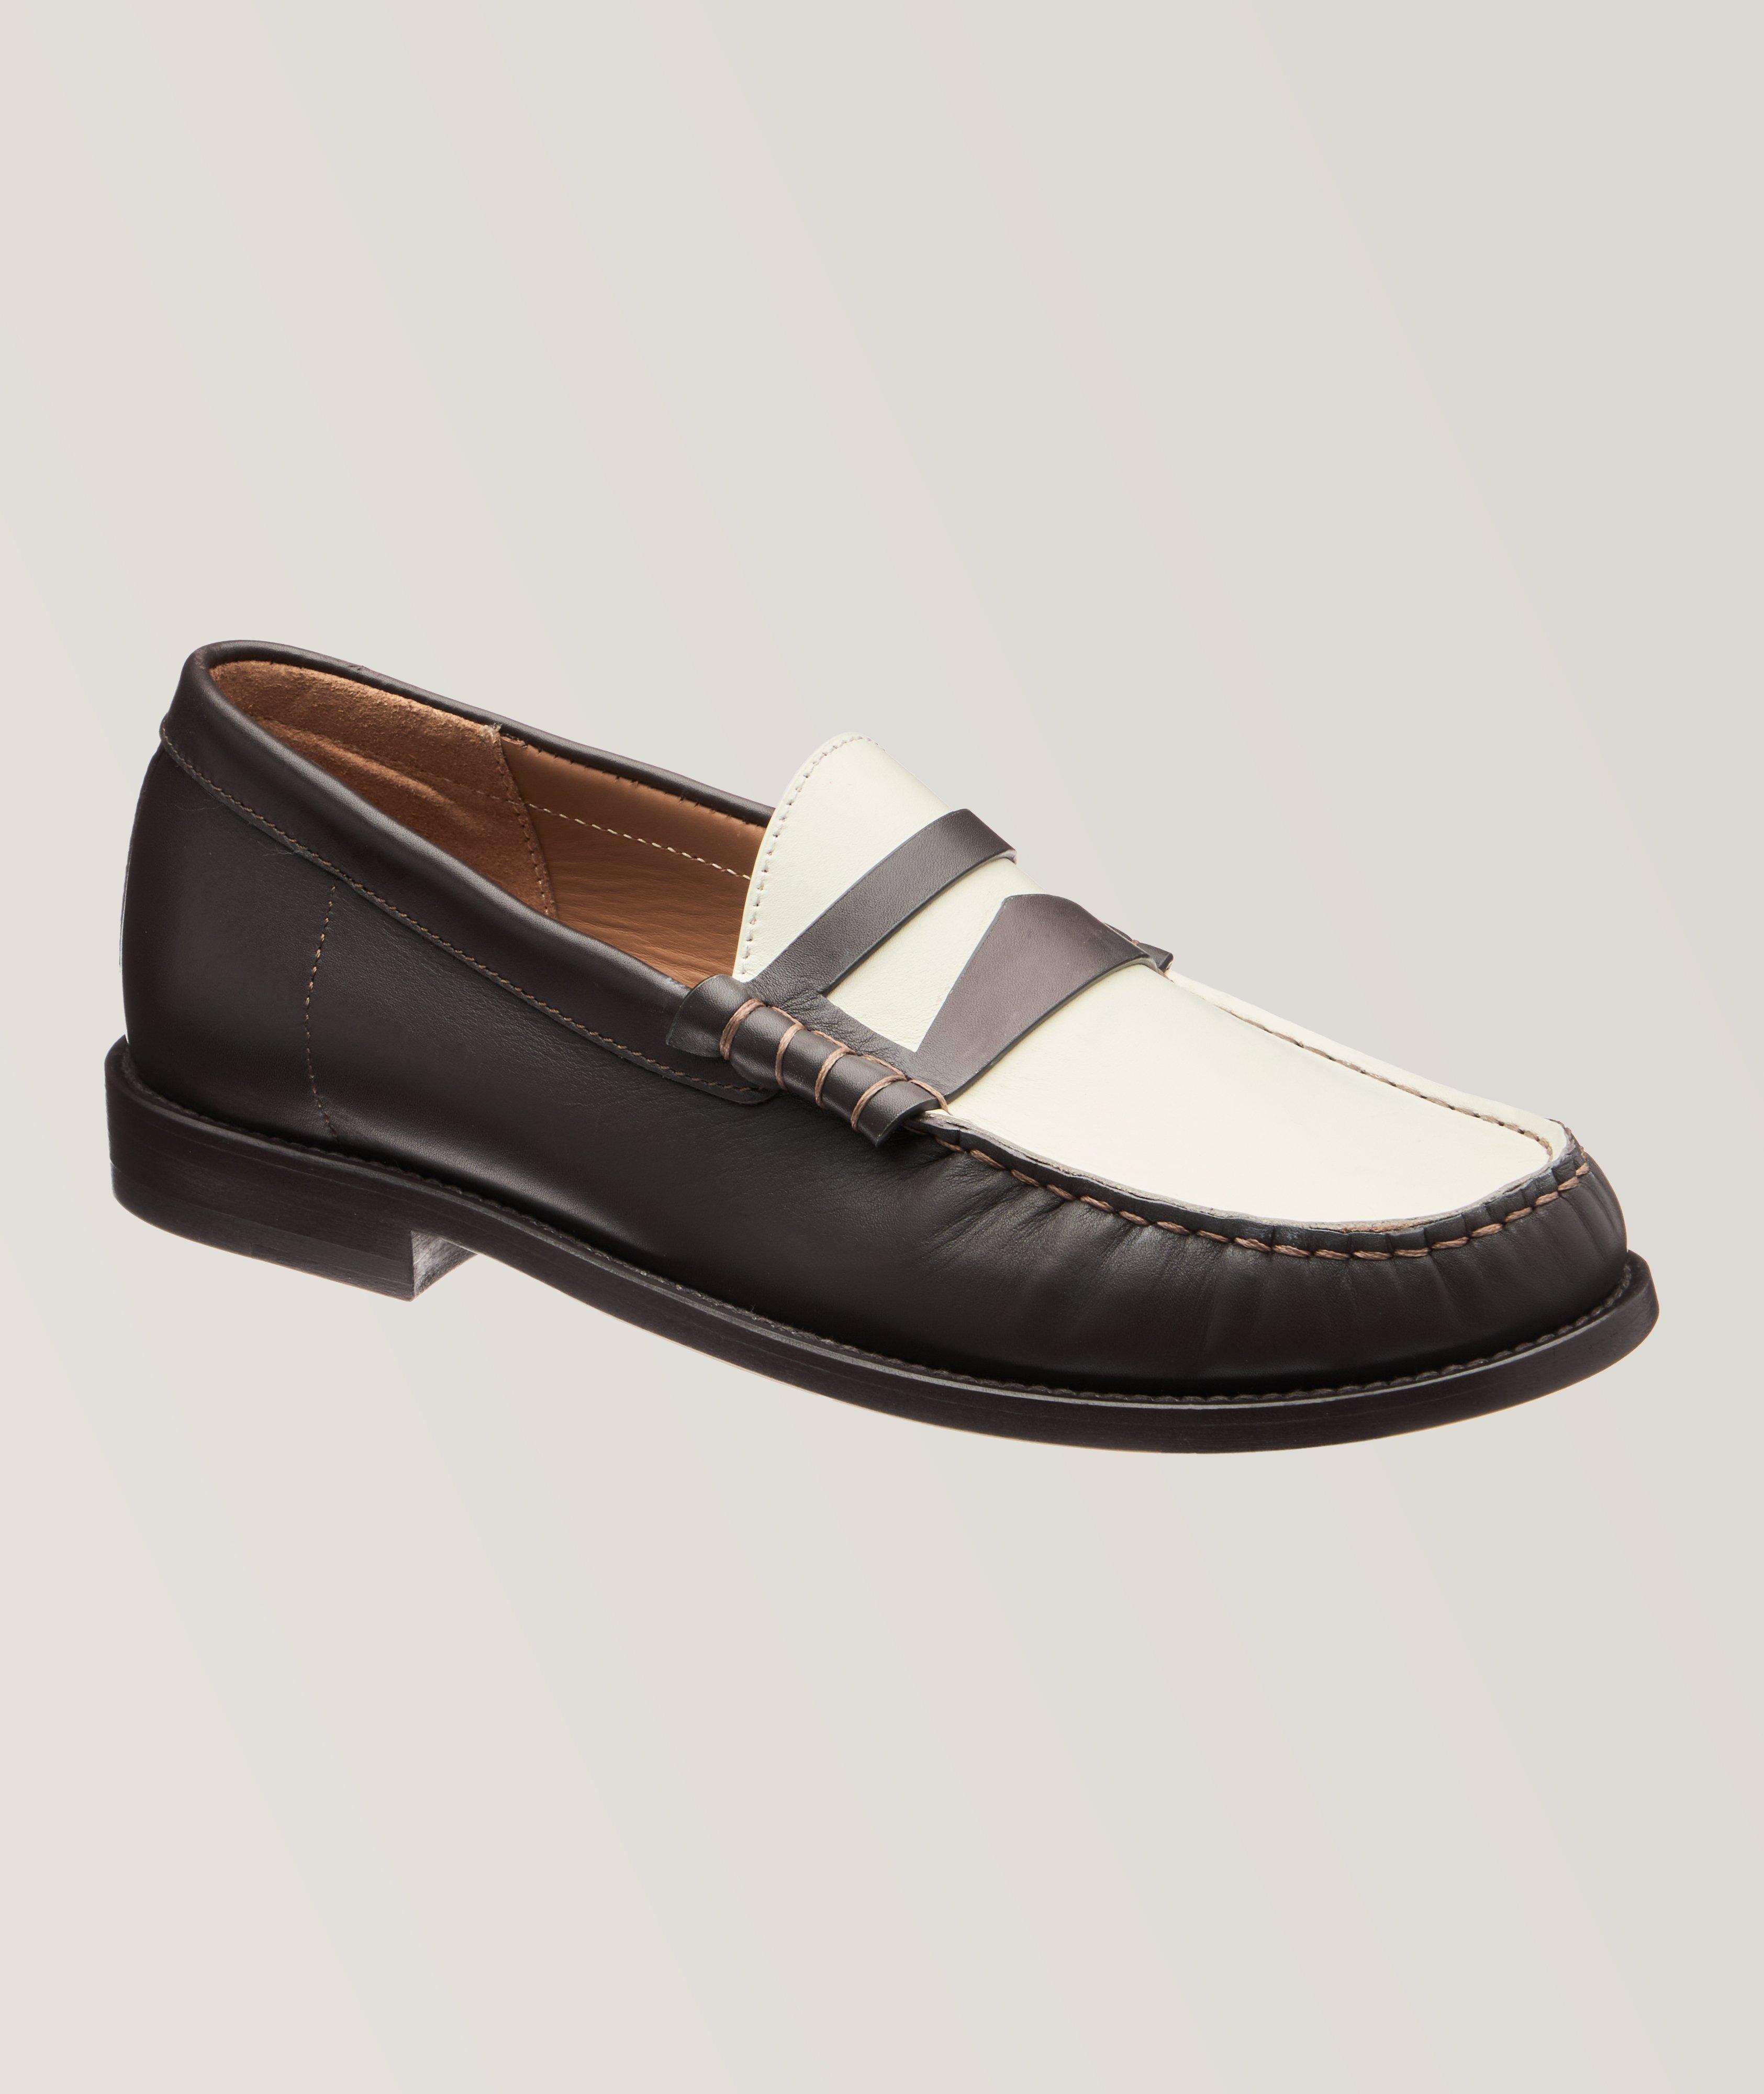 Two-Tone Leather Penny Loafers